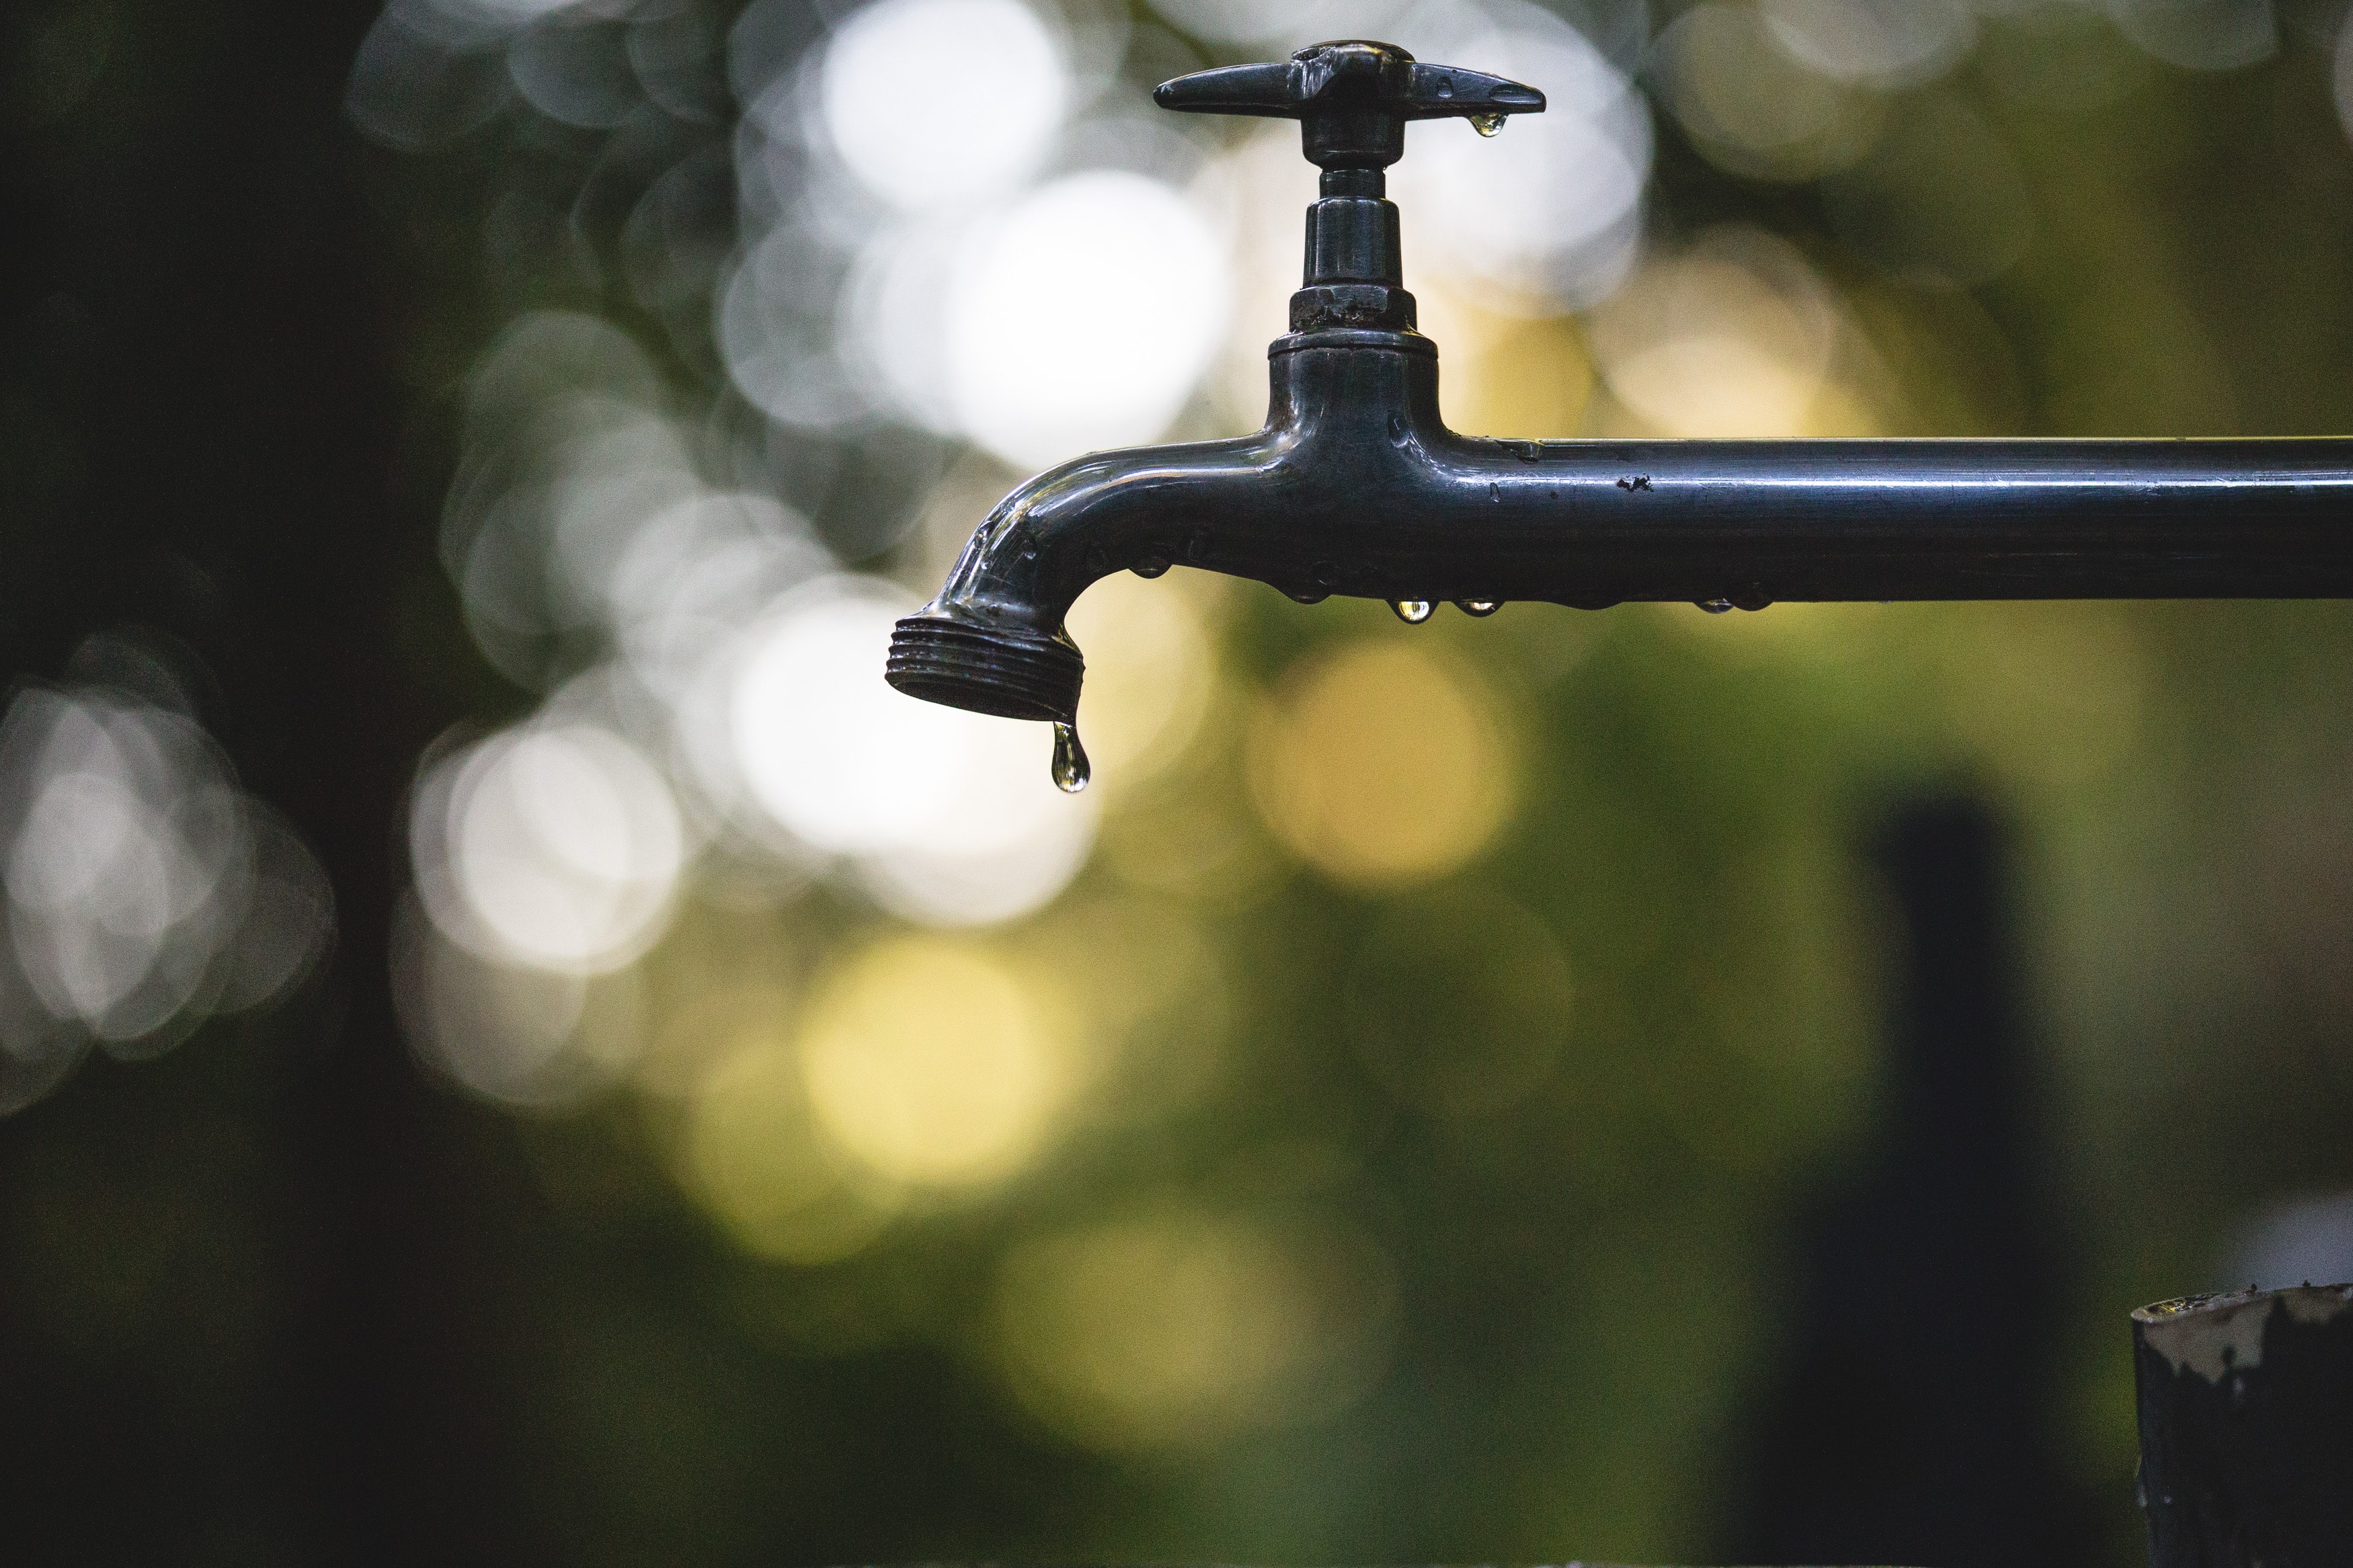 Test the water quality of your source water - domestic or tap water